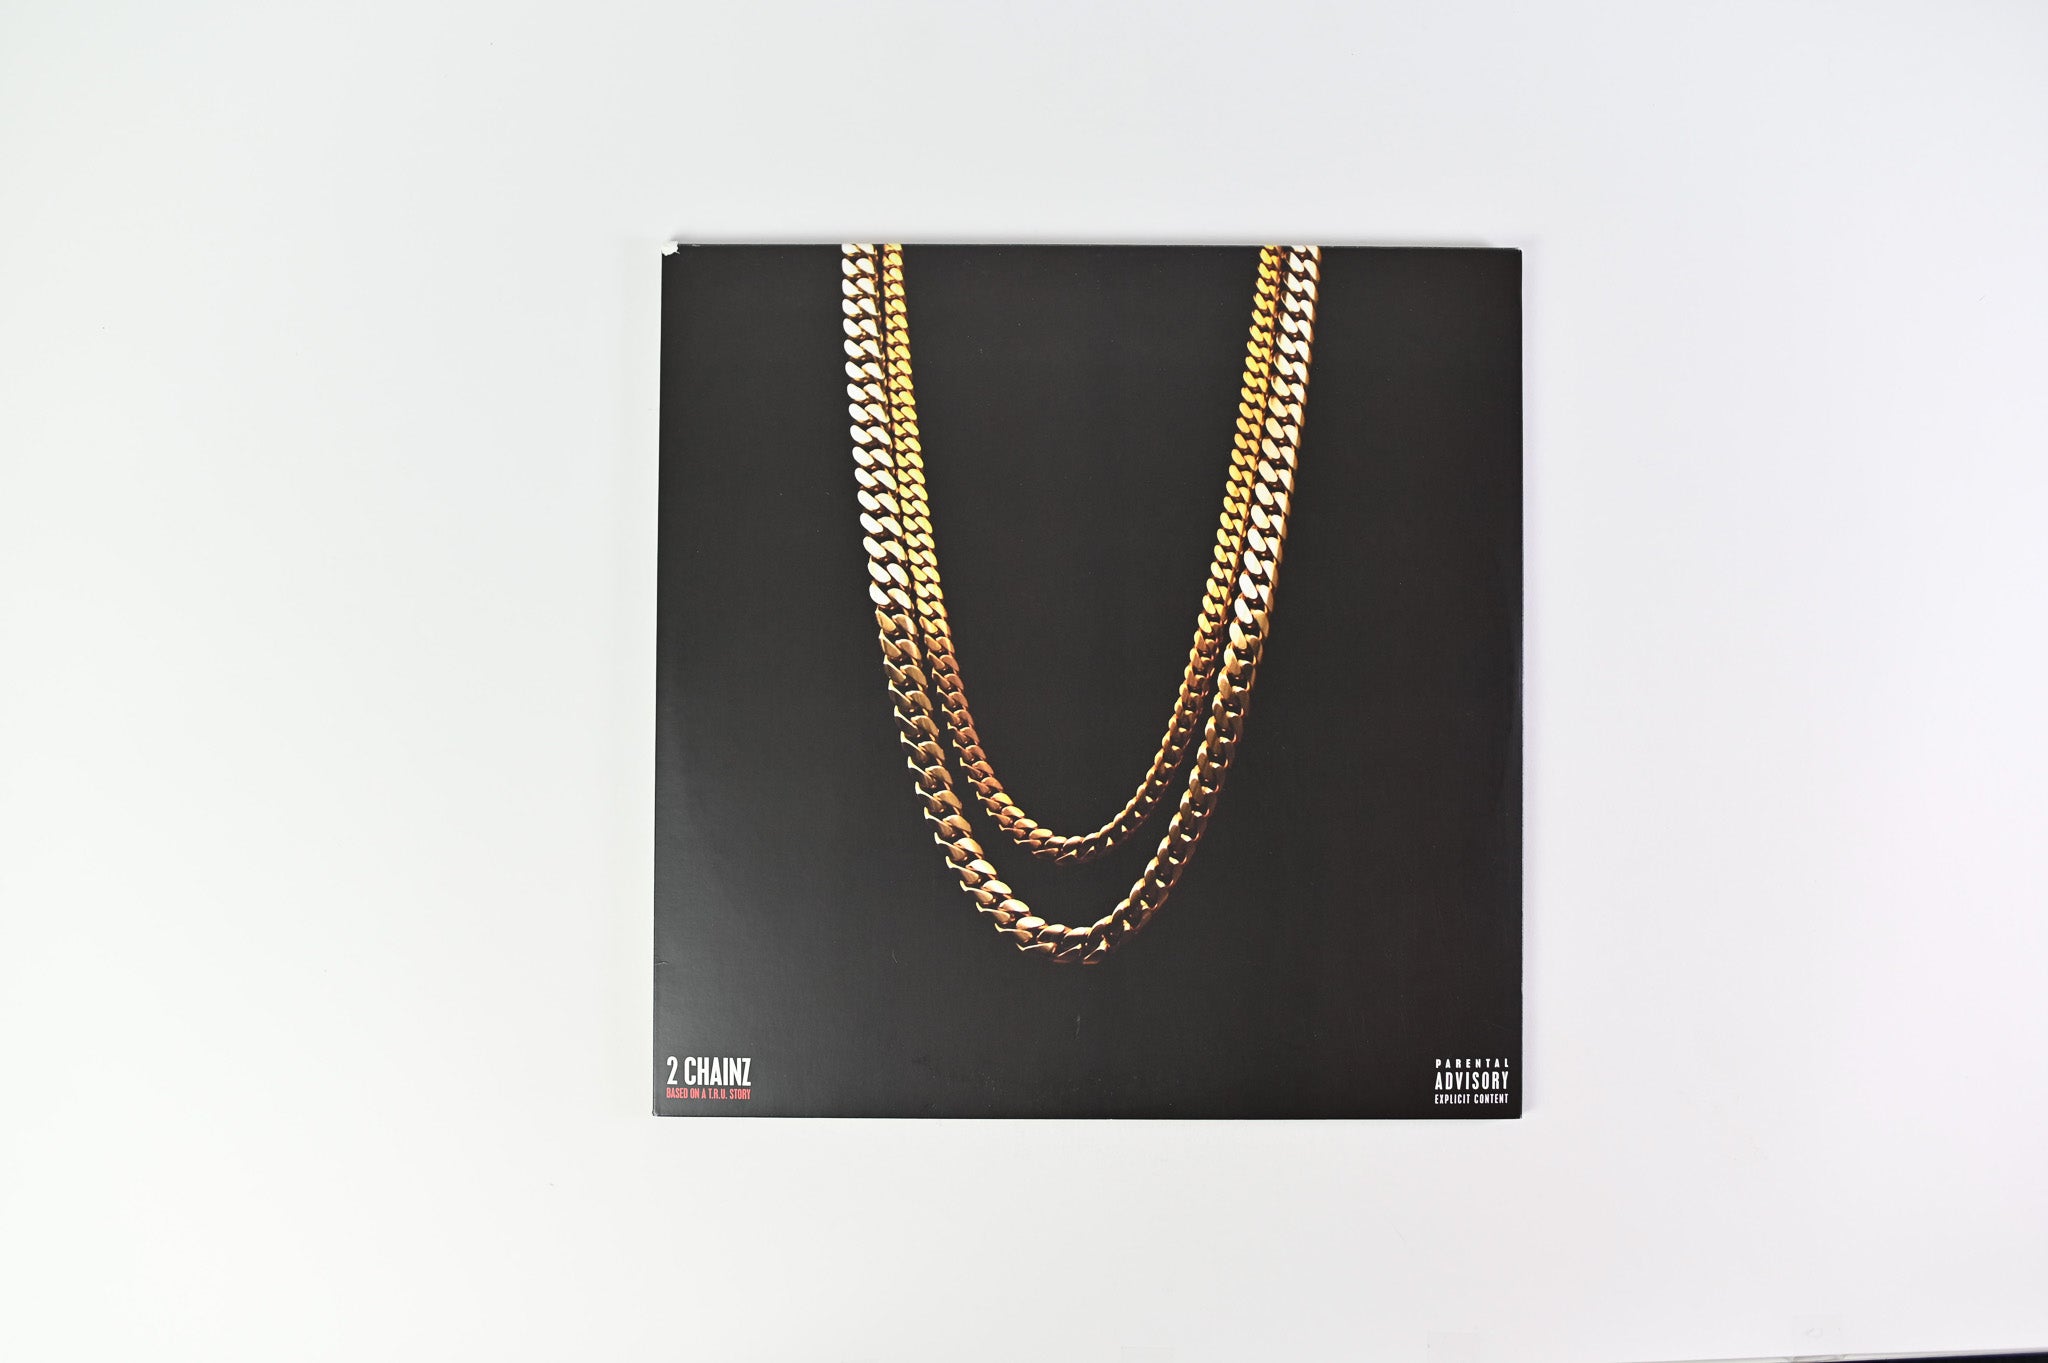 2 Chainz - Based On A T.R.U. Story on Def Jam